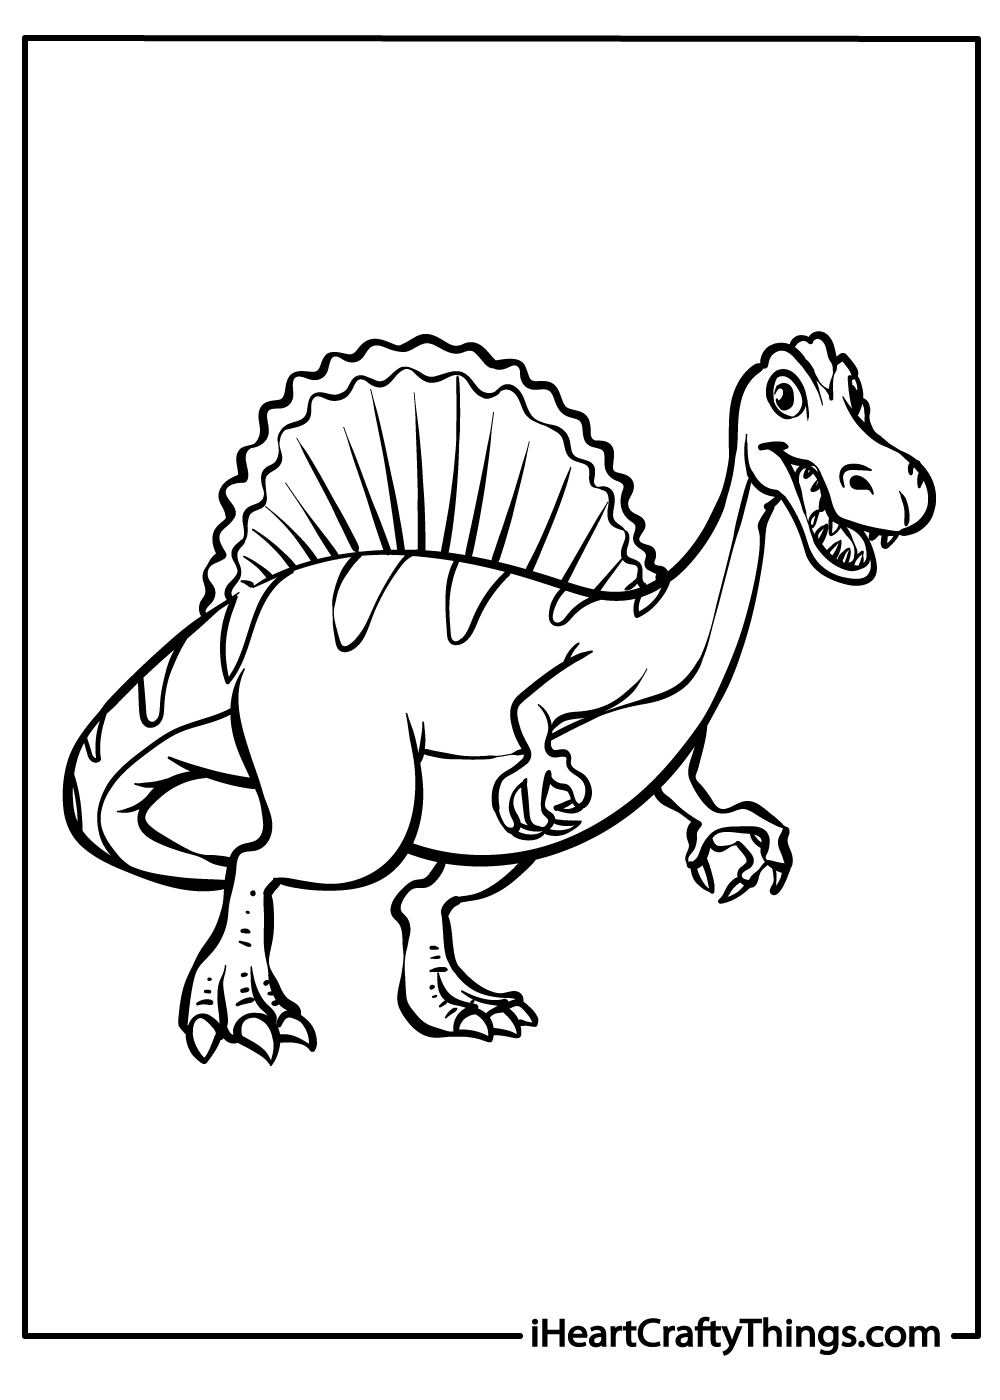 Spinosaurus coloring sheets for kids free download 